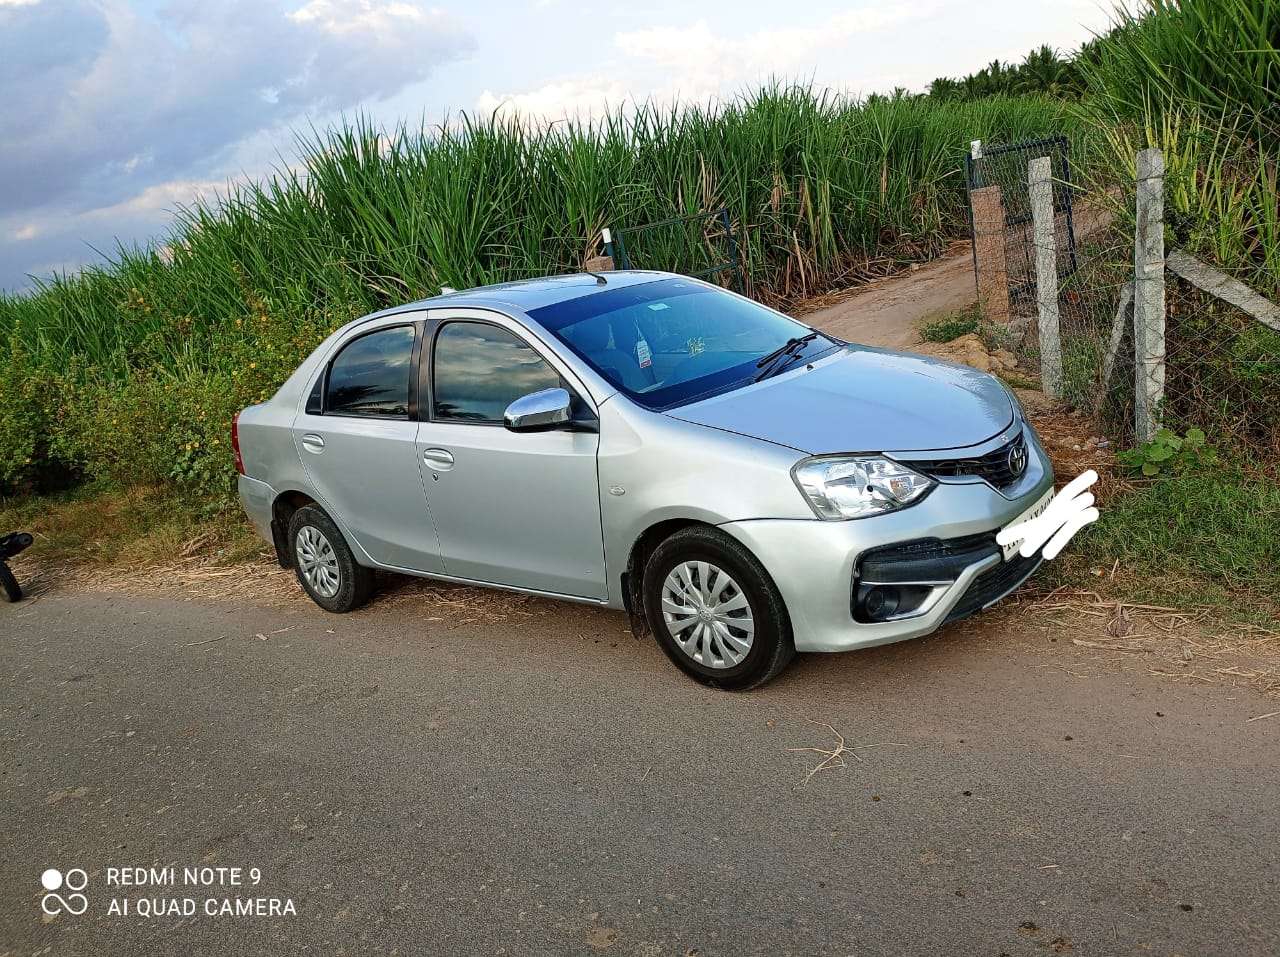 2951-for-sale-Toyota-Etios-Diesel-First-Owner-2017-TN-registered-rs-710000